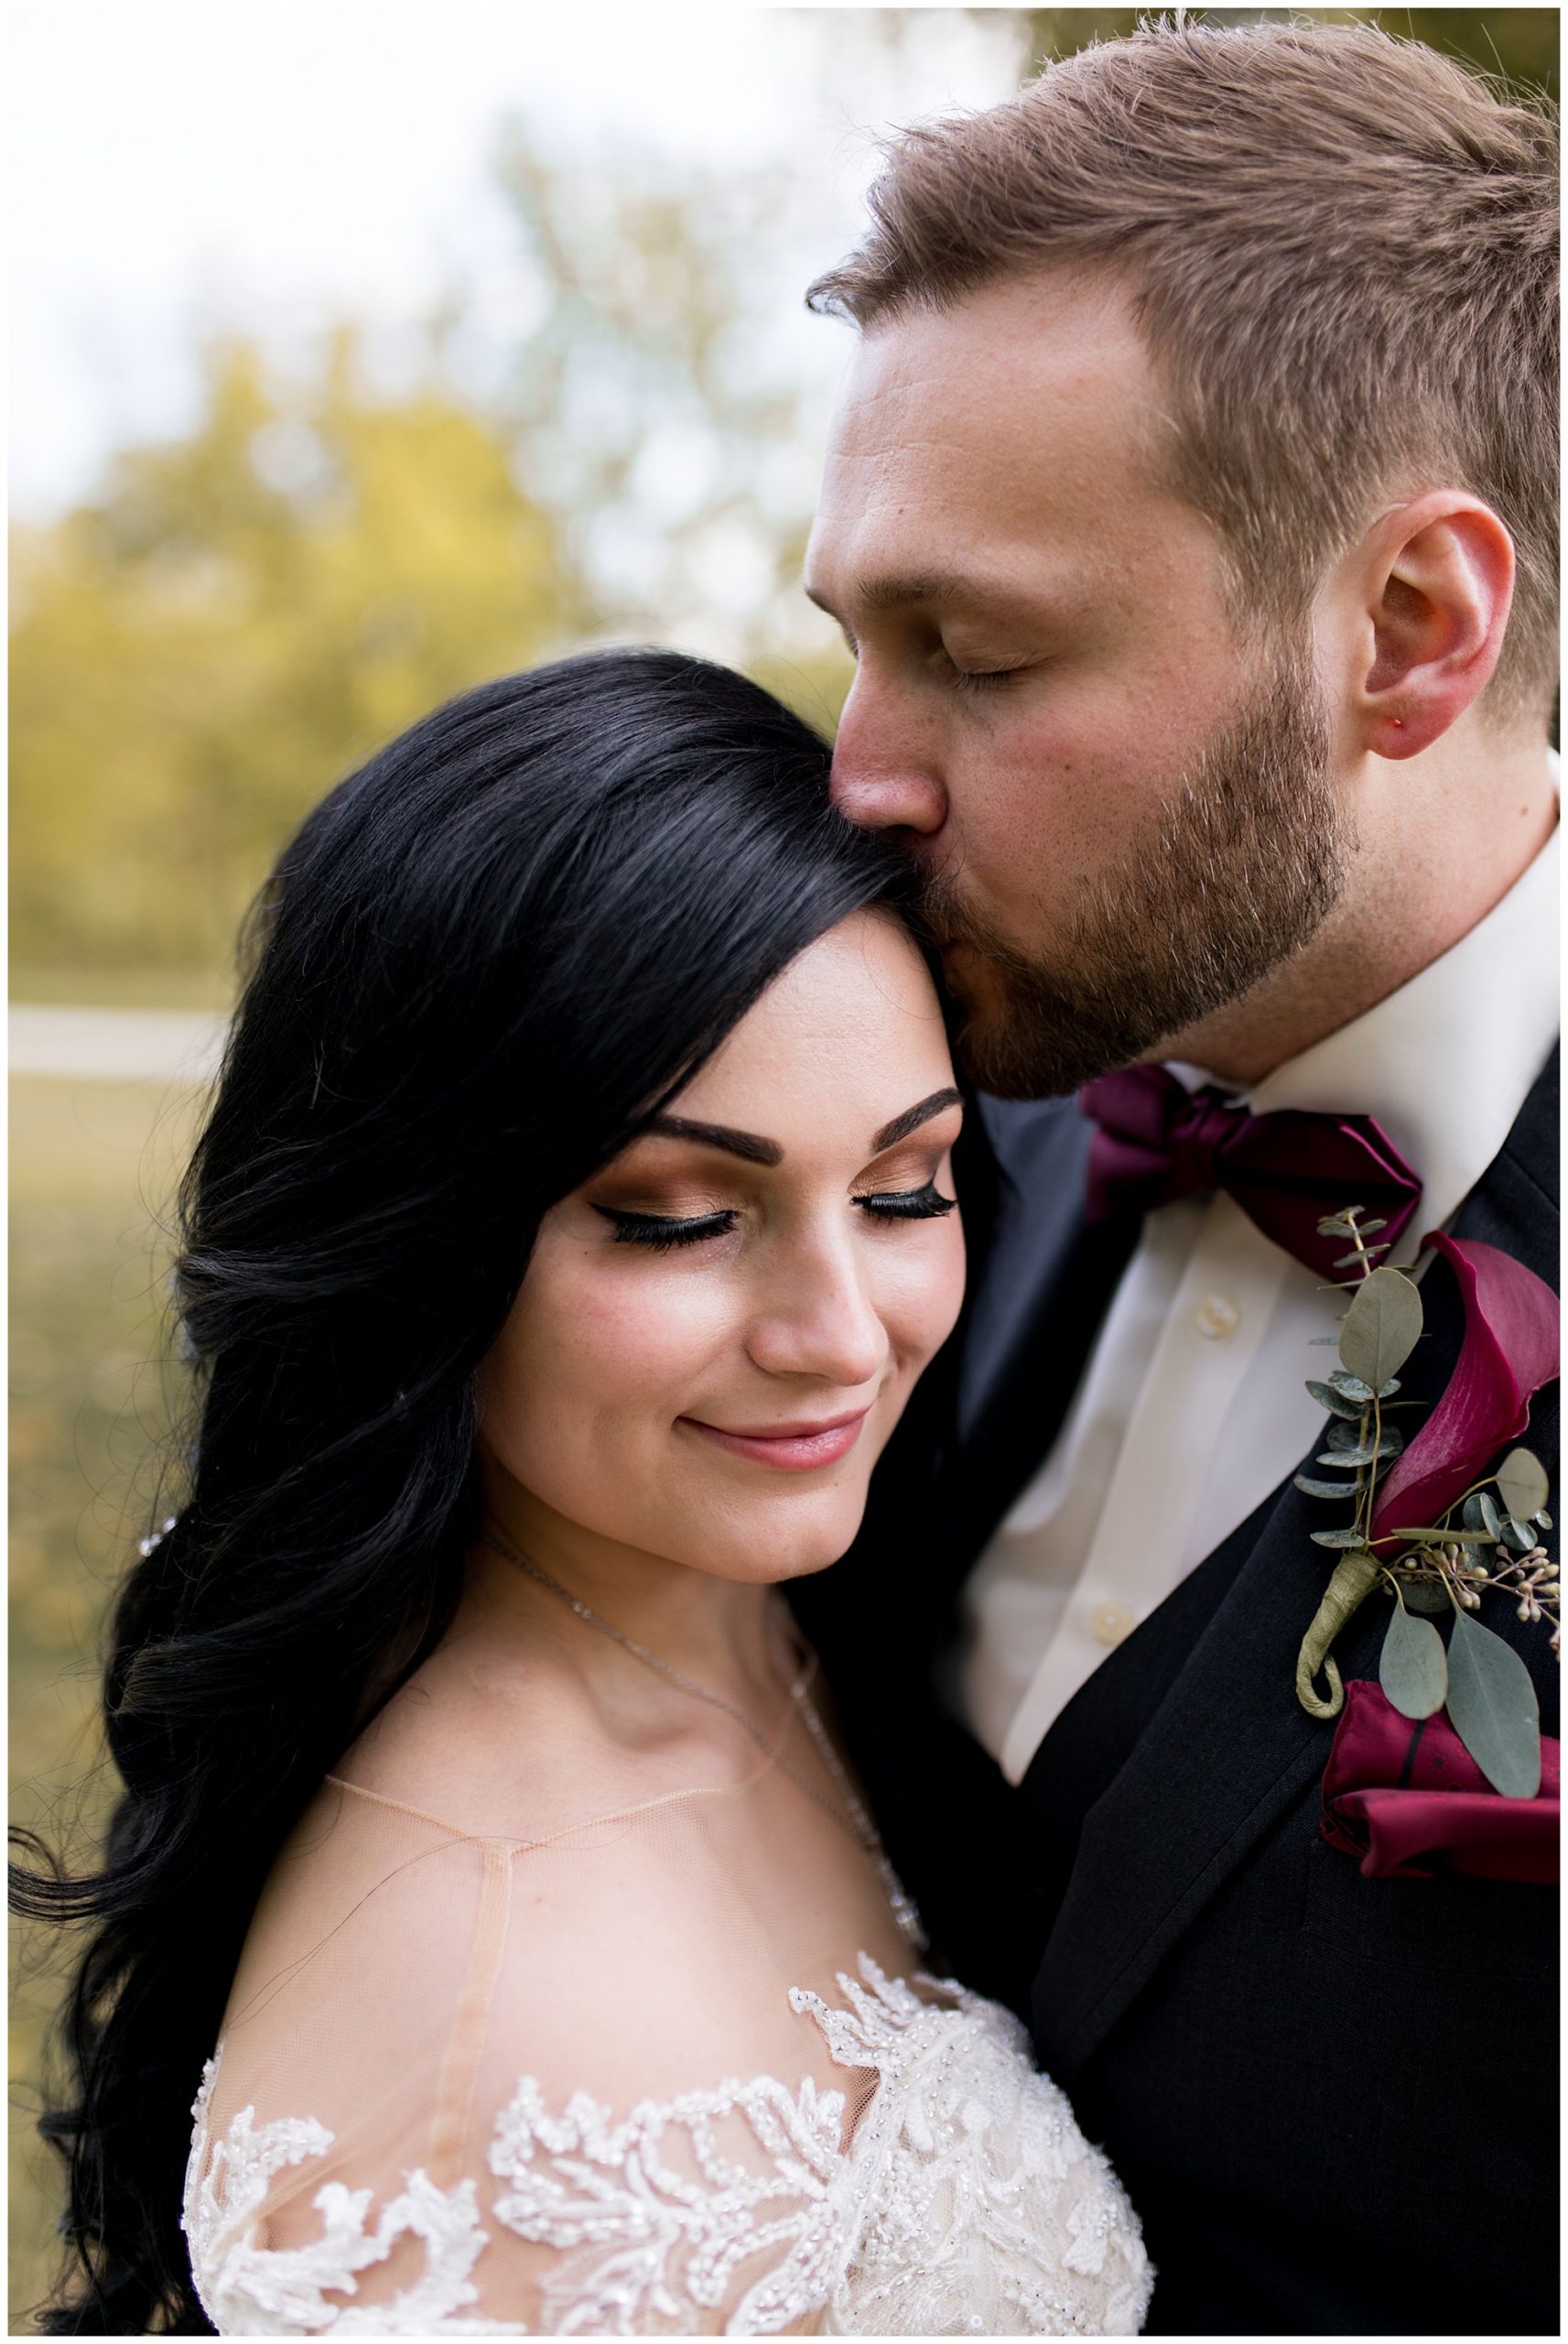 groom kisses bride's forehead during portraits before wedding ceremony at Legacy Barn in Kokomo